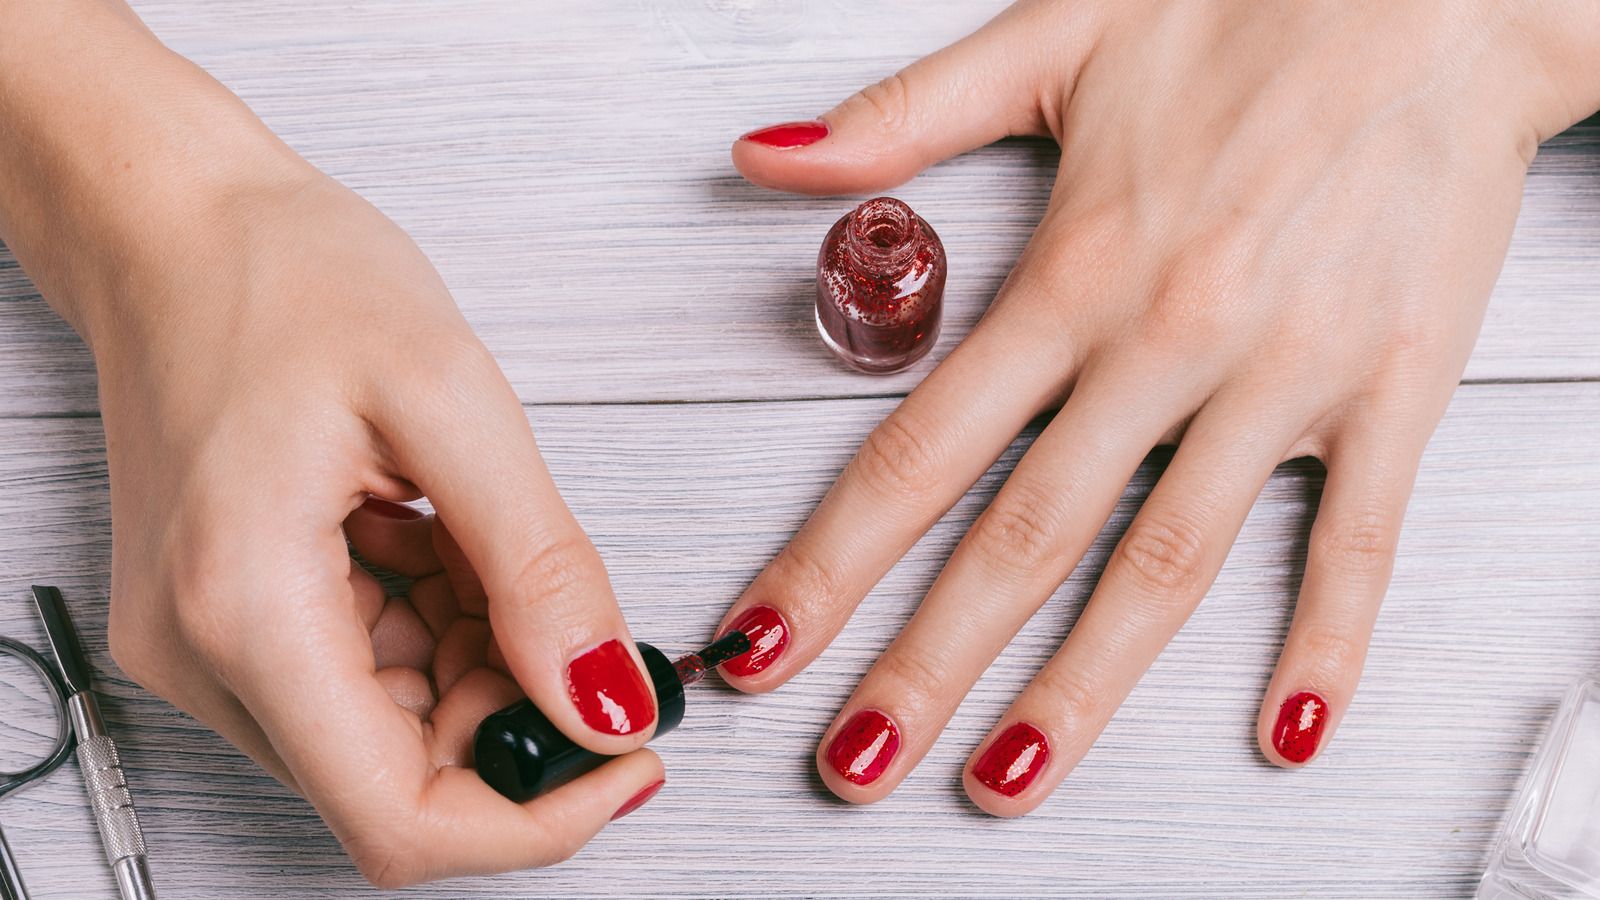 2. "Top Nail Colors for the Current Season" - wide 7